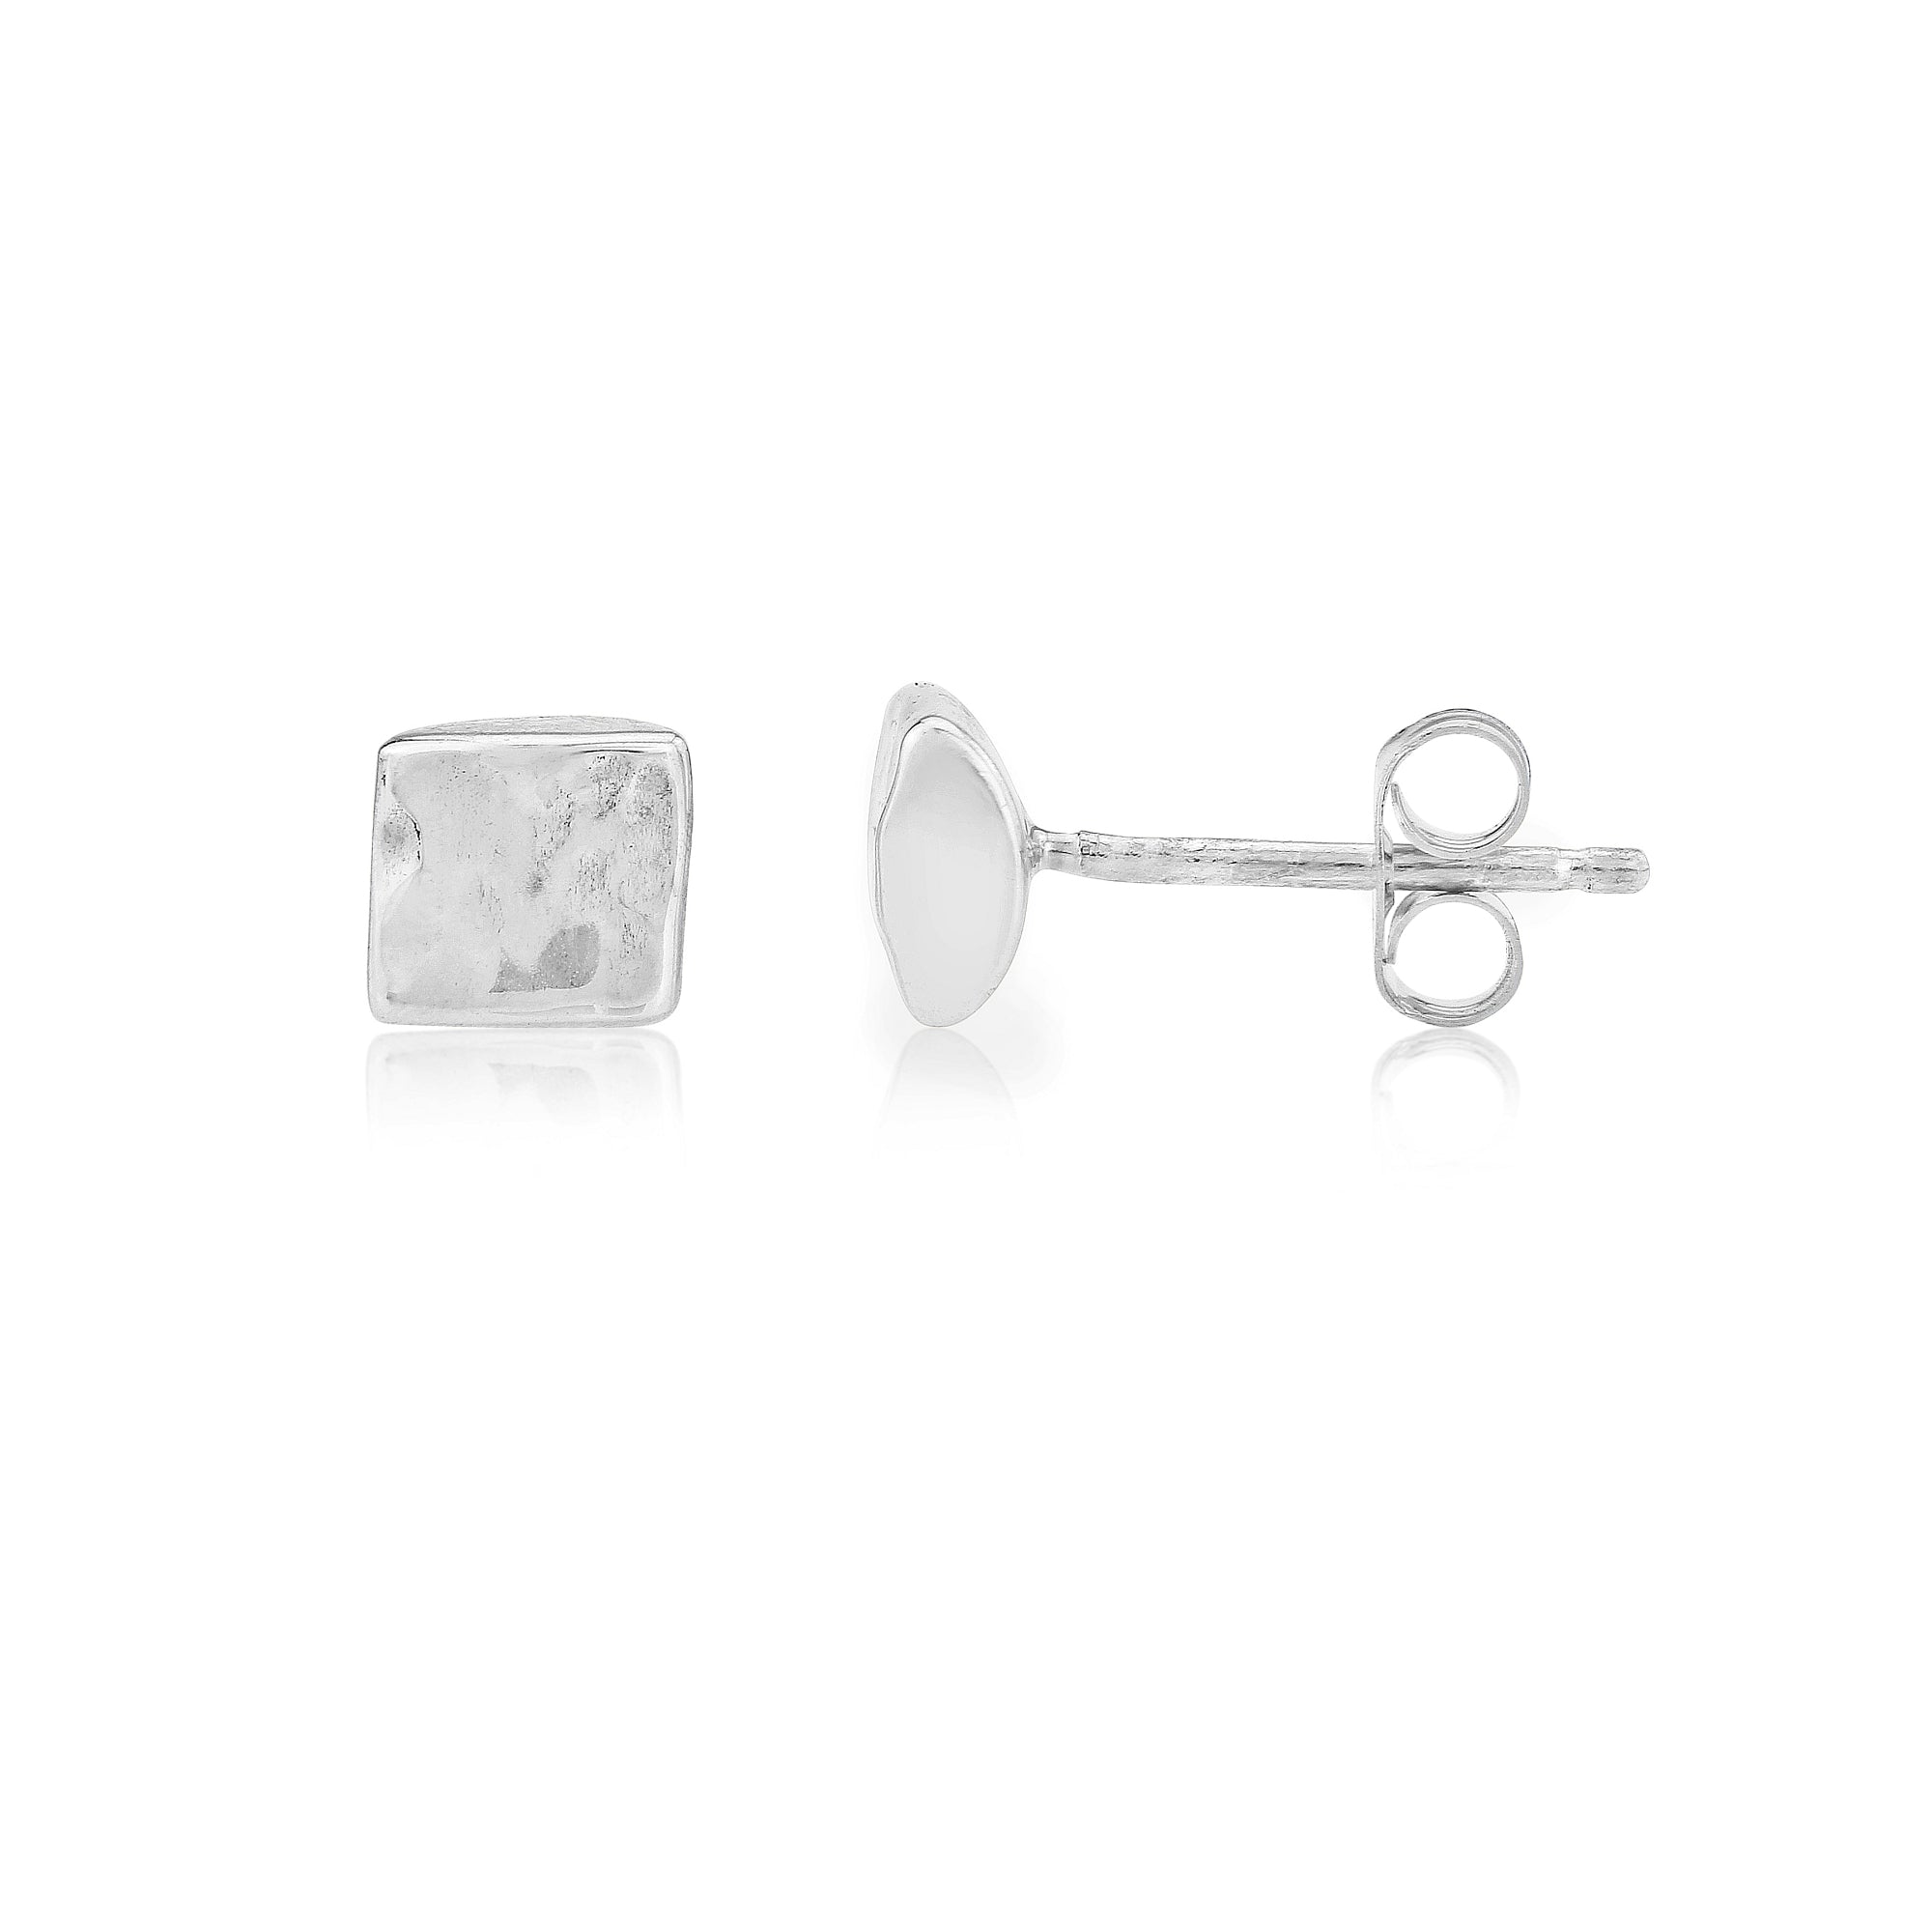 Handmade dimpled texture silver studs